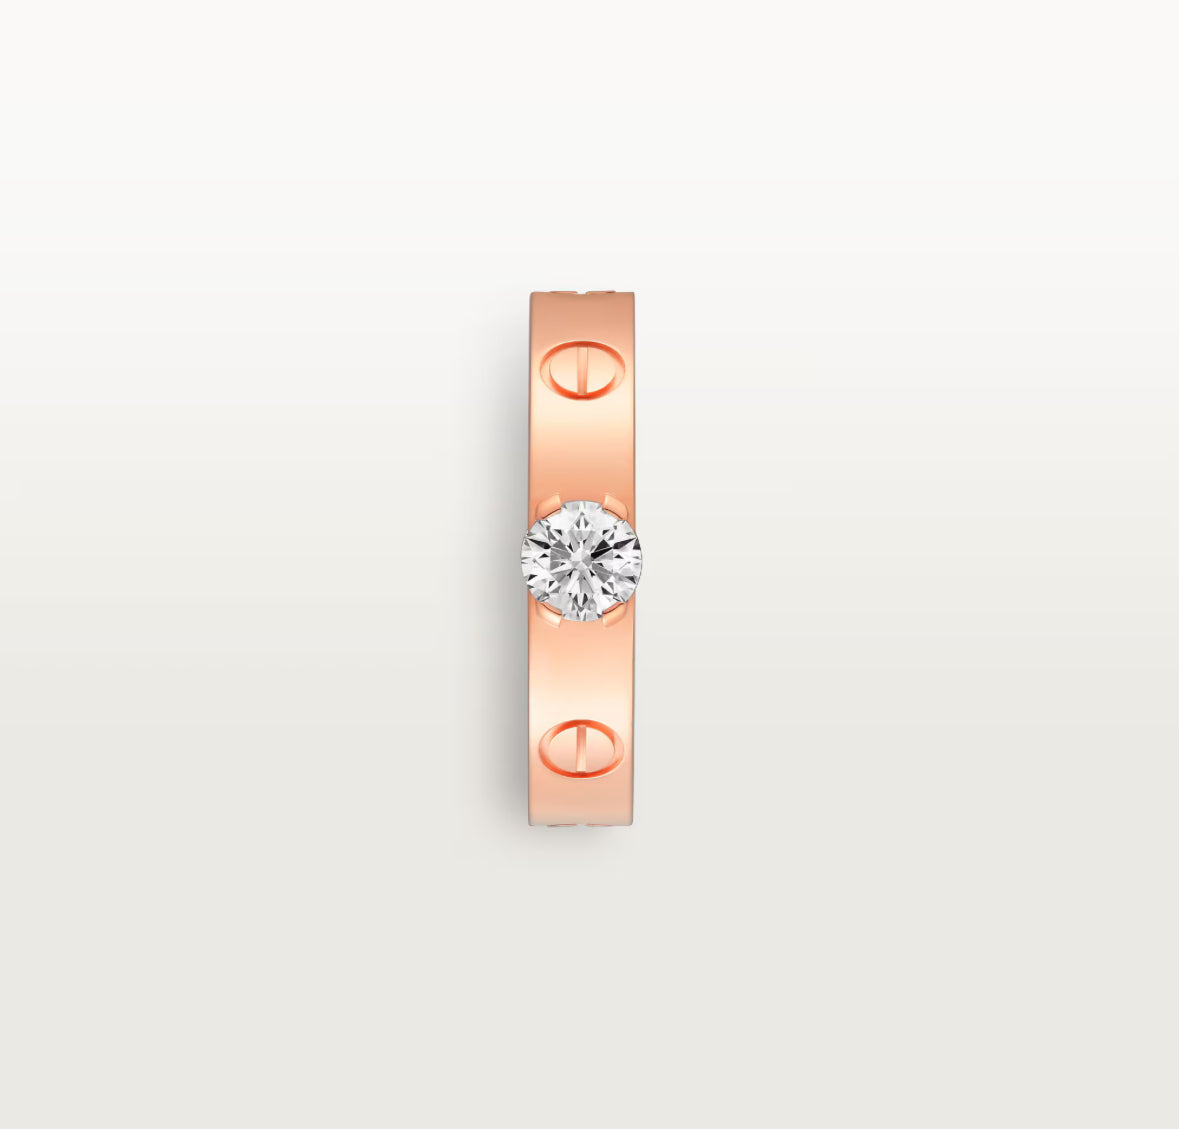 Cartier Love Solitaire Ring “Rose Gold / 1 Diamond”